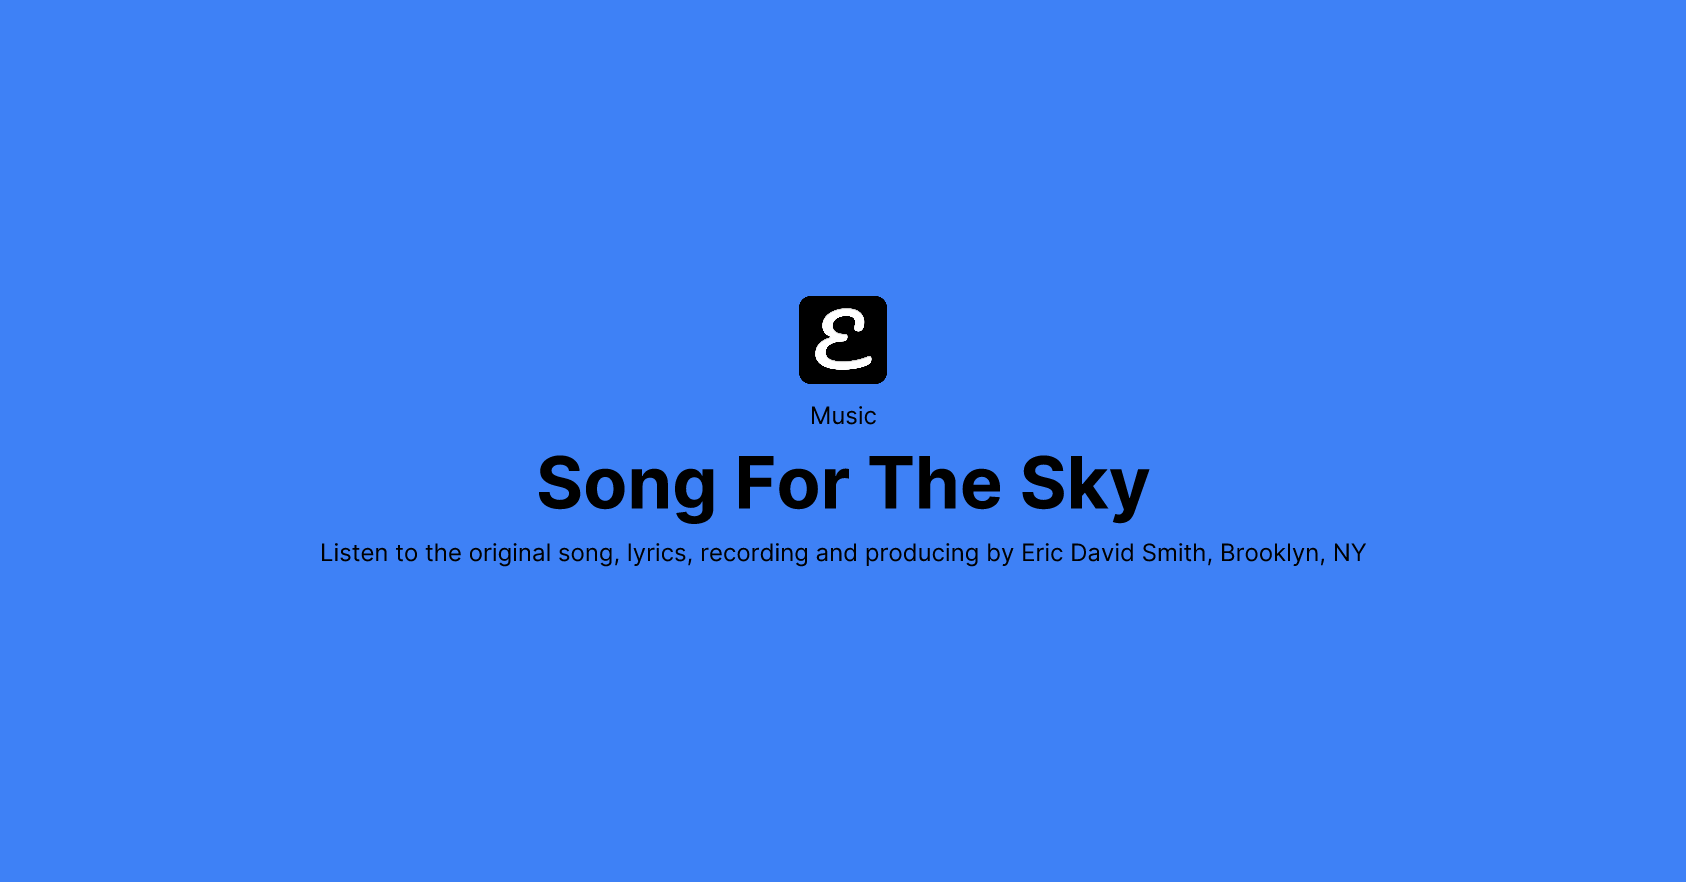 Song For The Sky by Eric David Smith